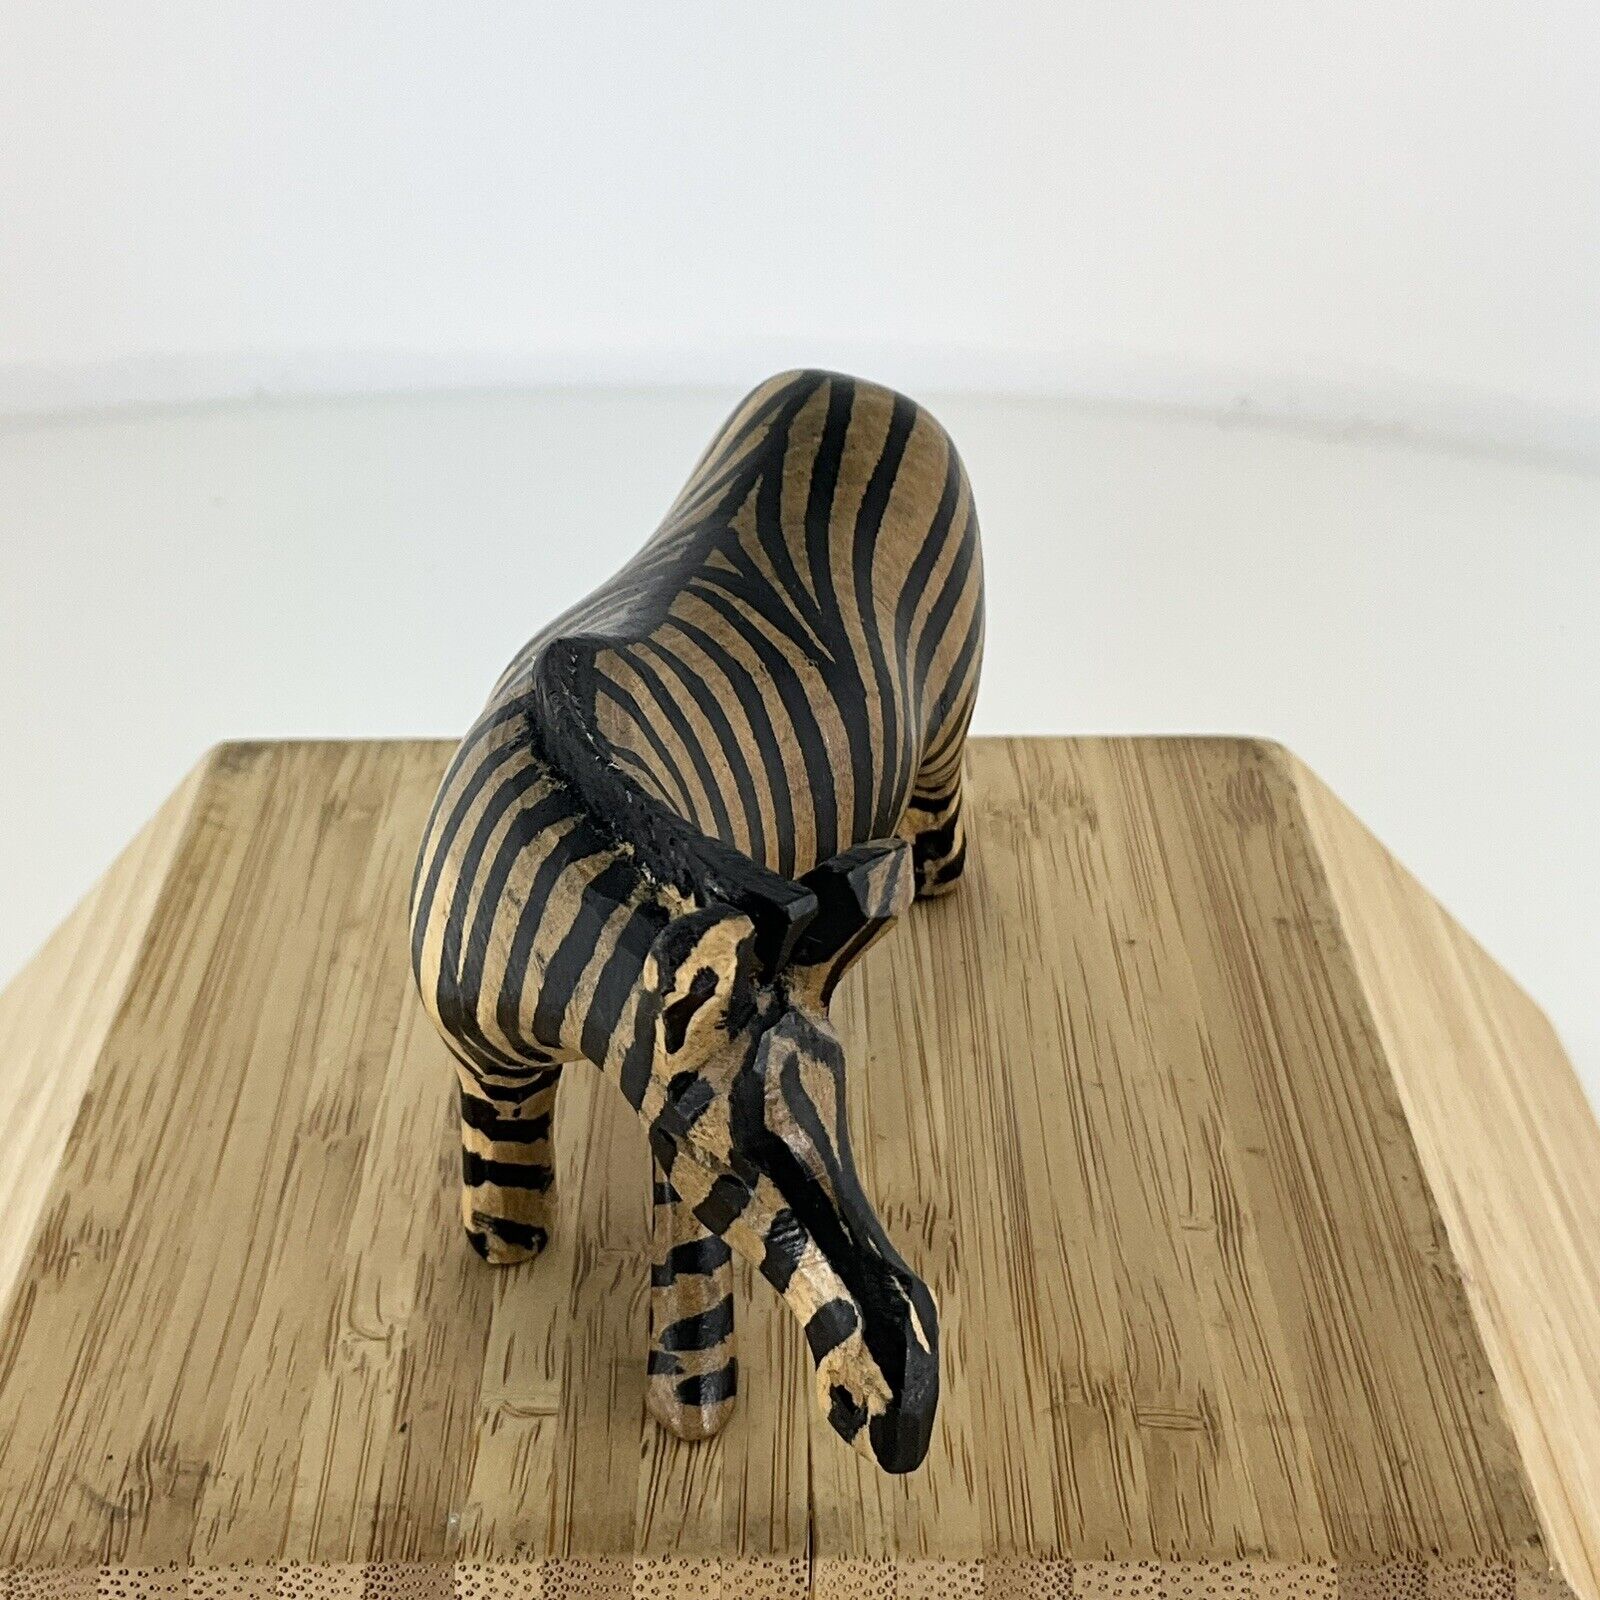 Vintage Wooden Hand Carved Zebra Made In Kenya Beautifully Hand Carved. Quality